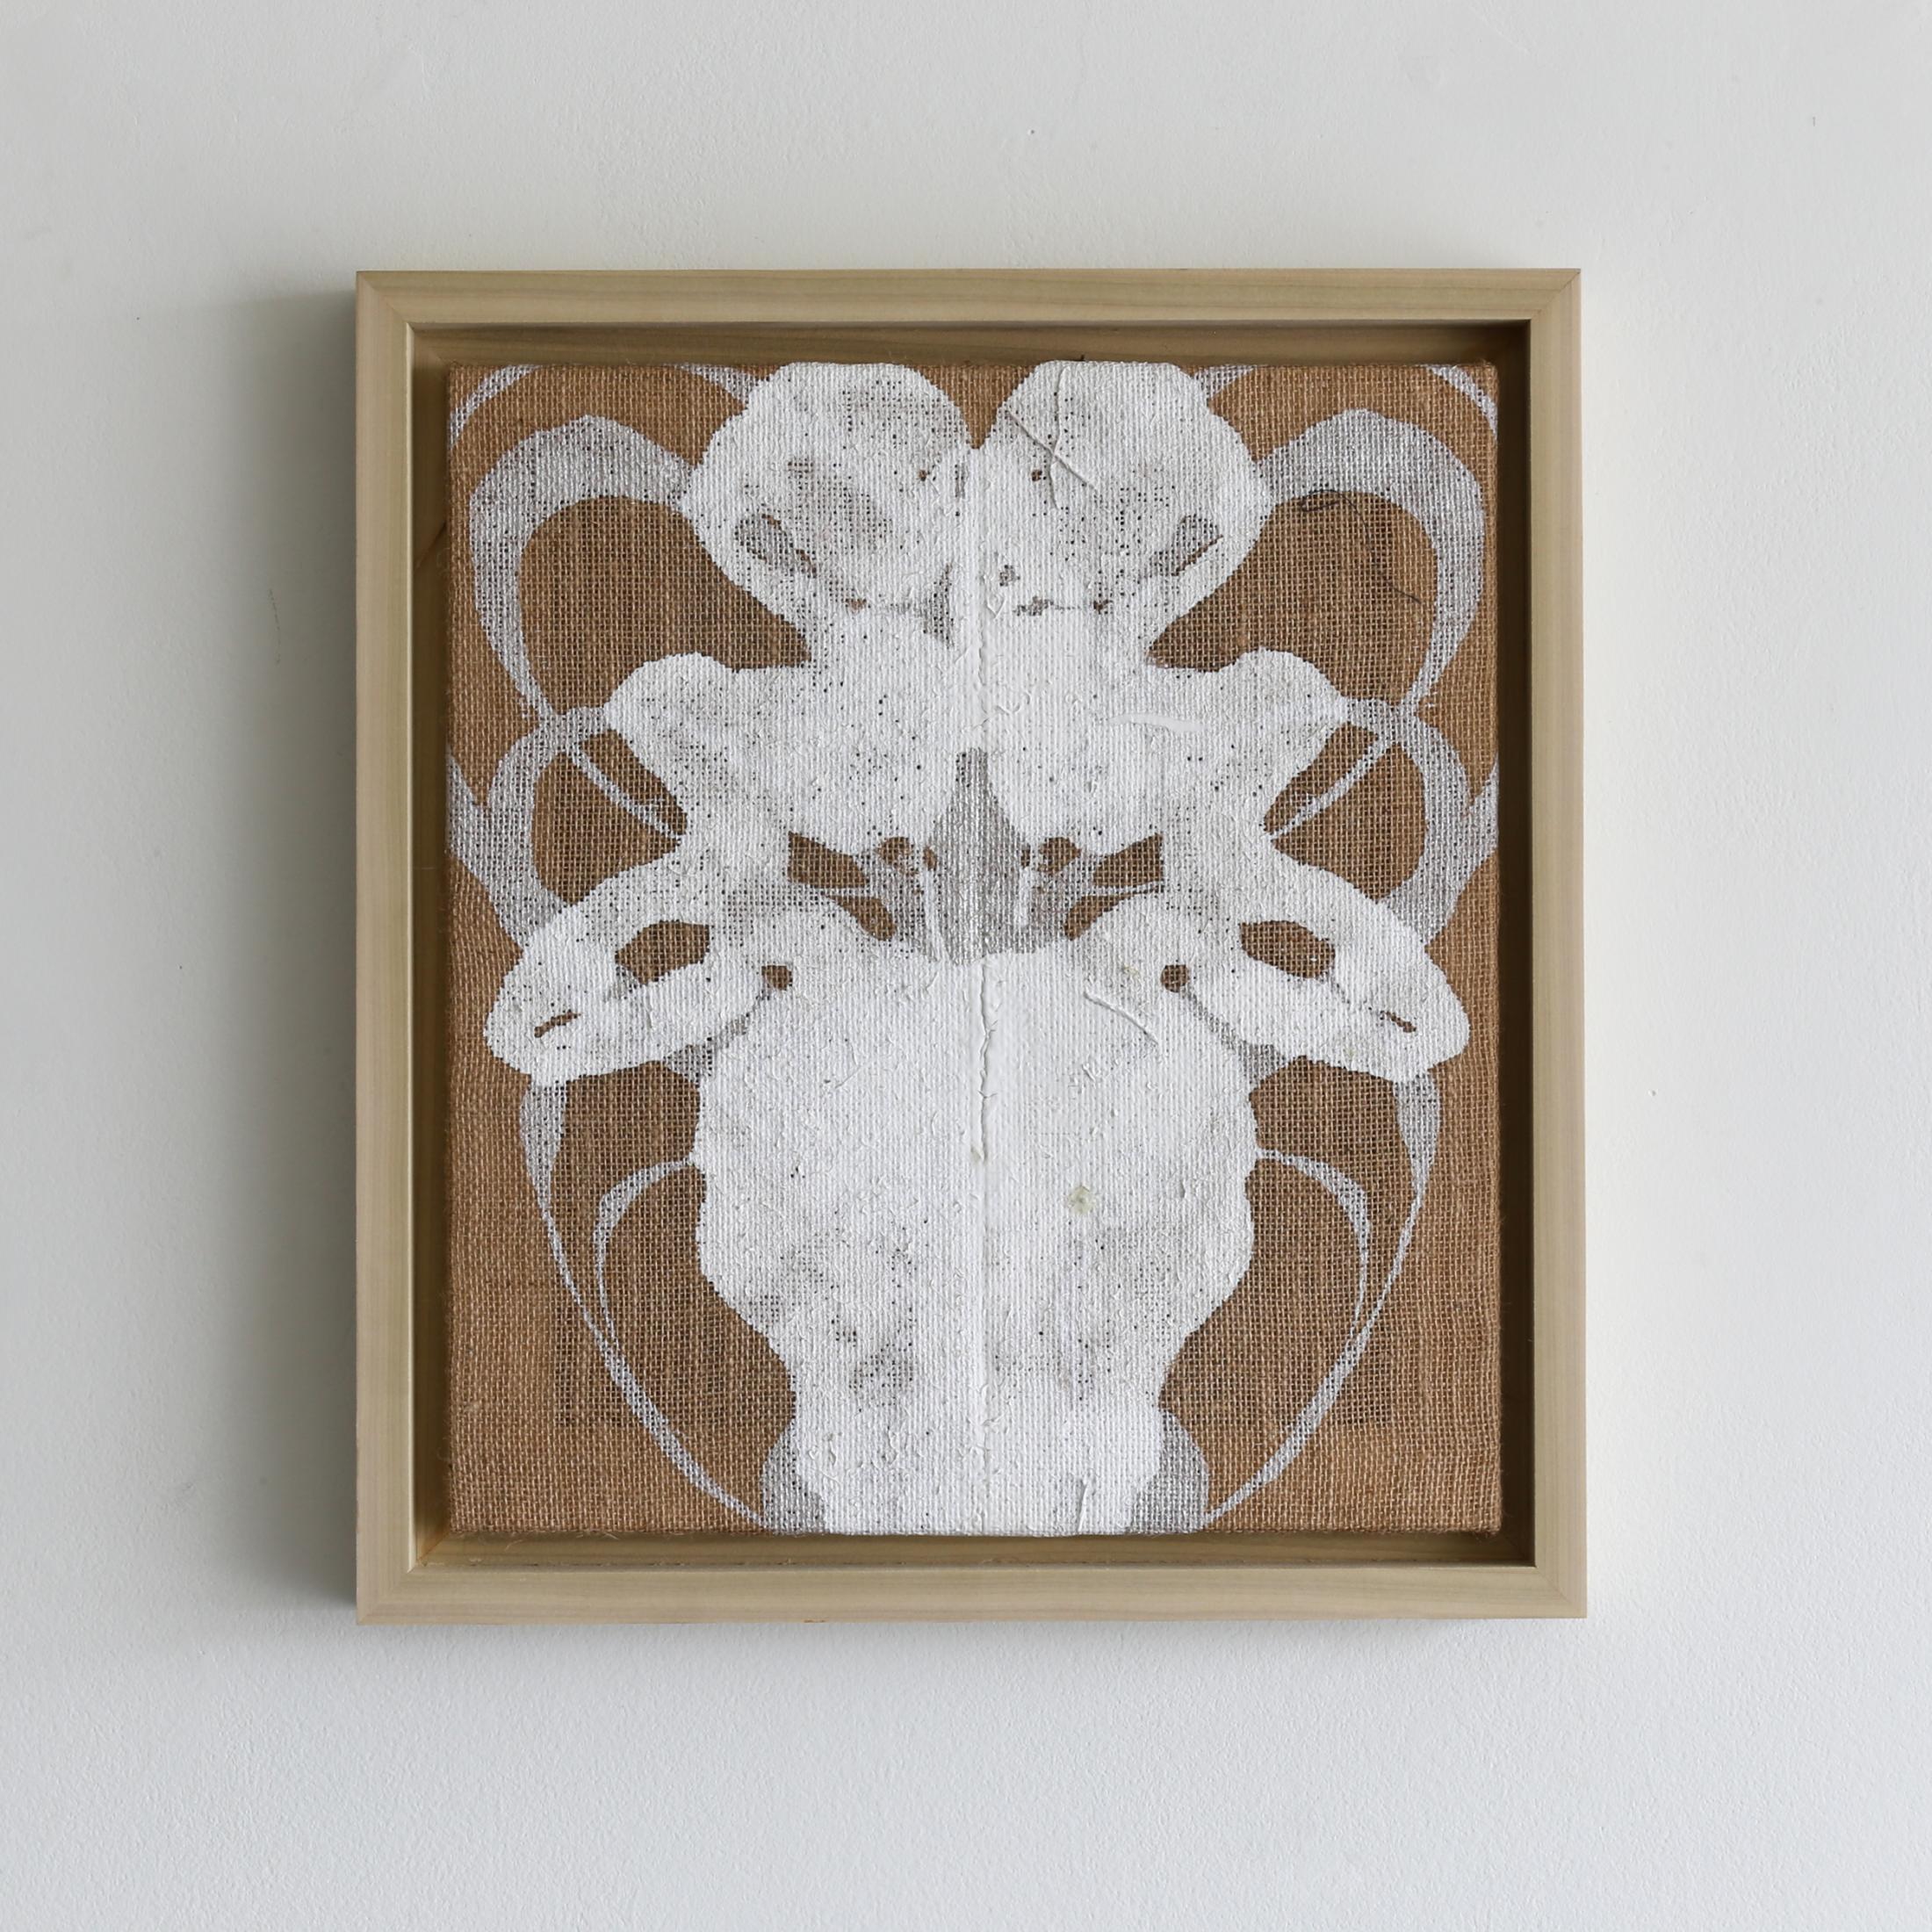 Kim Fonder, RORSCHACH I, Mixed Media on Burlap, 20.50 X 18.50 in, $1,100.00, Brown, White, Abstract, contemporary, fine art, Burlap

Kim Fonder loves texture and touch. Her paintings and furniture reflect her infatuation with these two